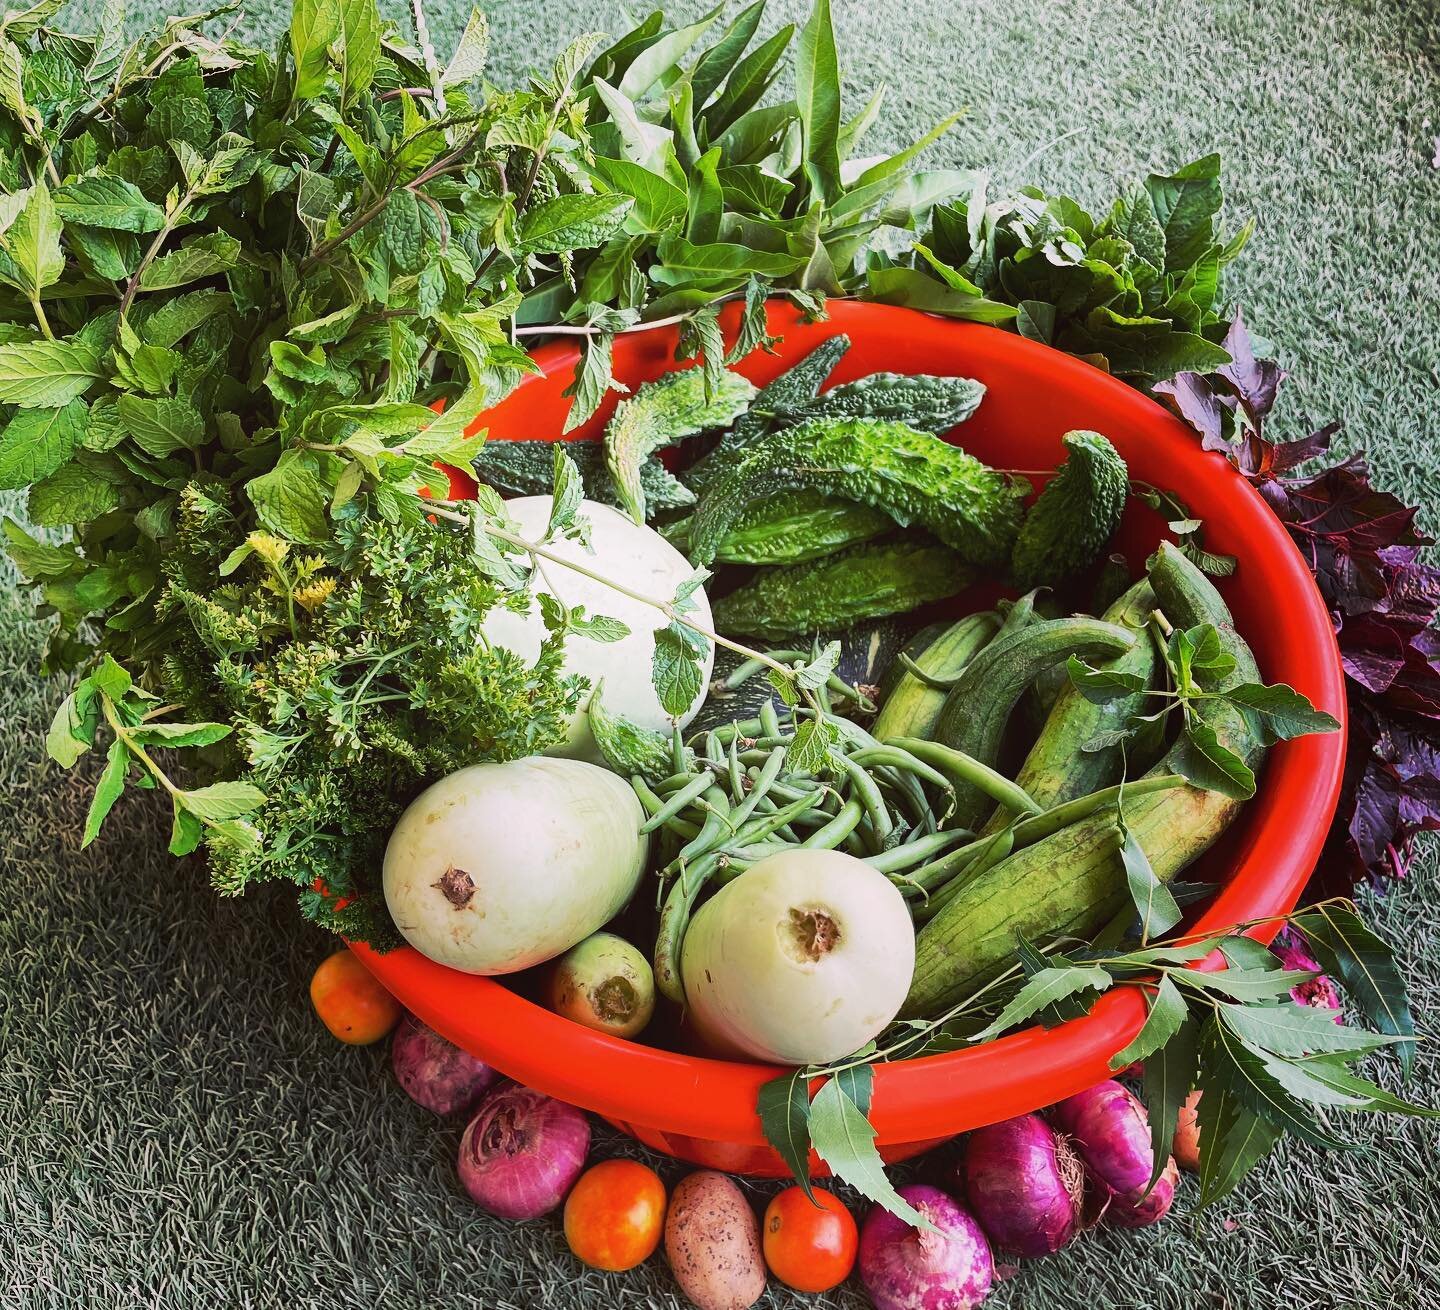 I am genuinely excited the day I get my weekly supply of organic veggies - this bunch of freshness is from @khetulife. @khetulife offers farm-share packages to people in Delhi-NCR. So after paying a fixed quarterly amount, you get a weeks supply of o